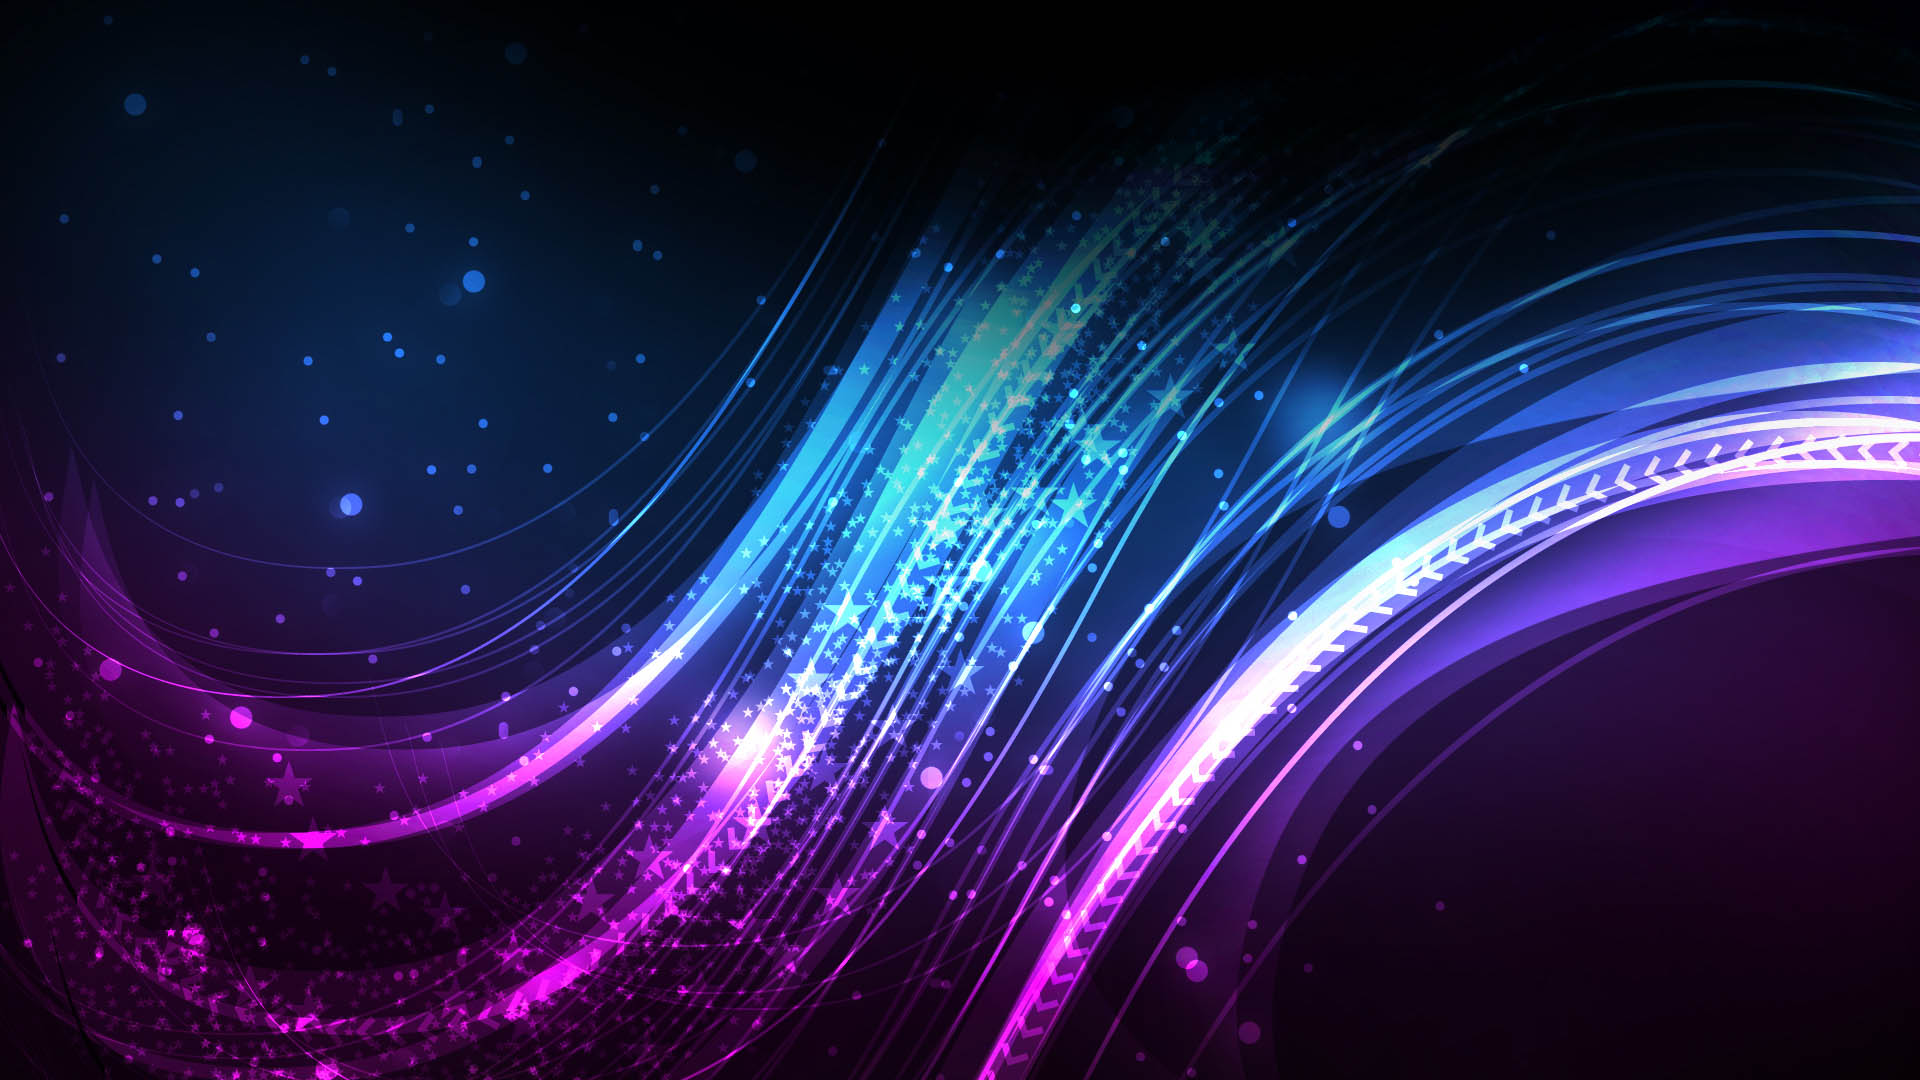 Purple and Blue Abstract wallpaper | 1920x1080 | #10894